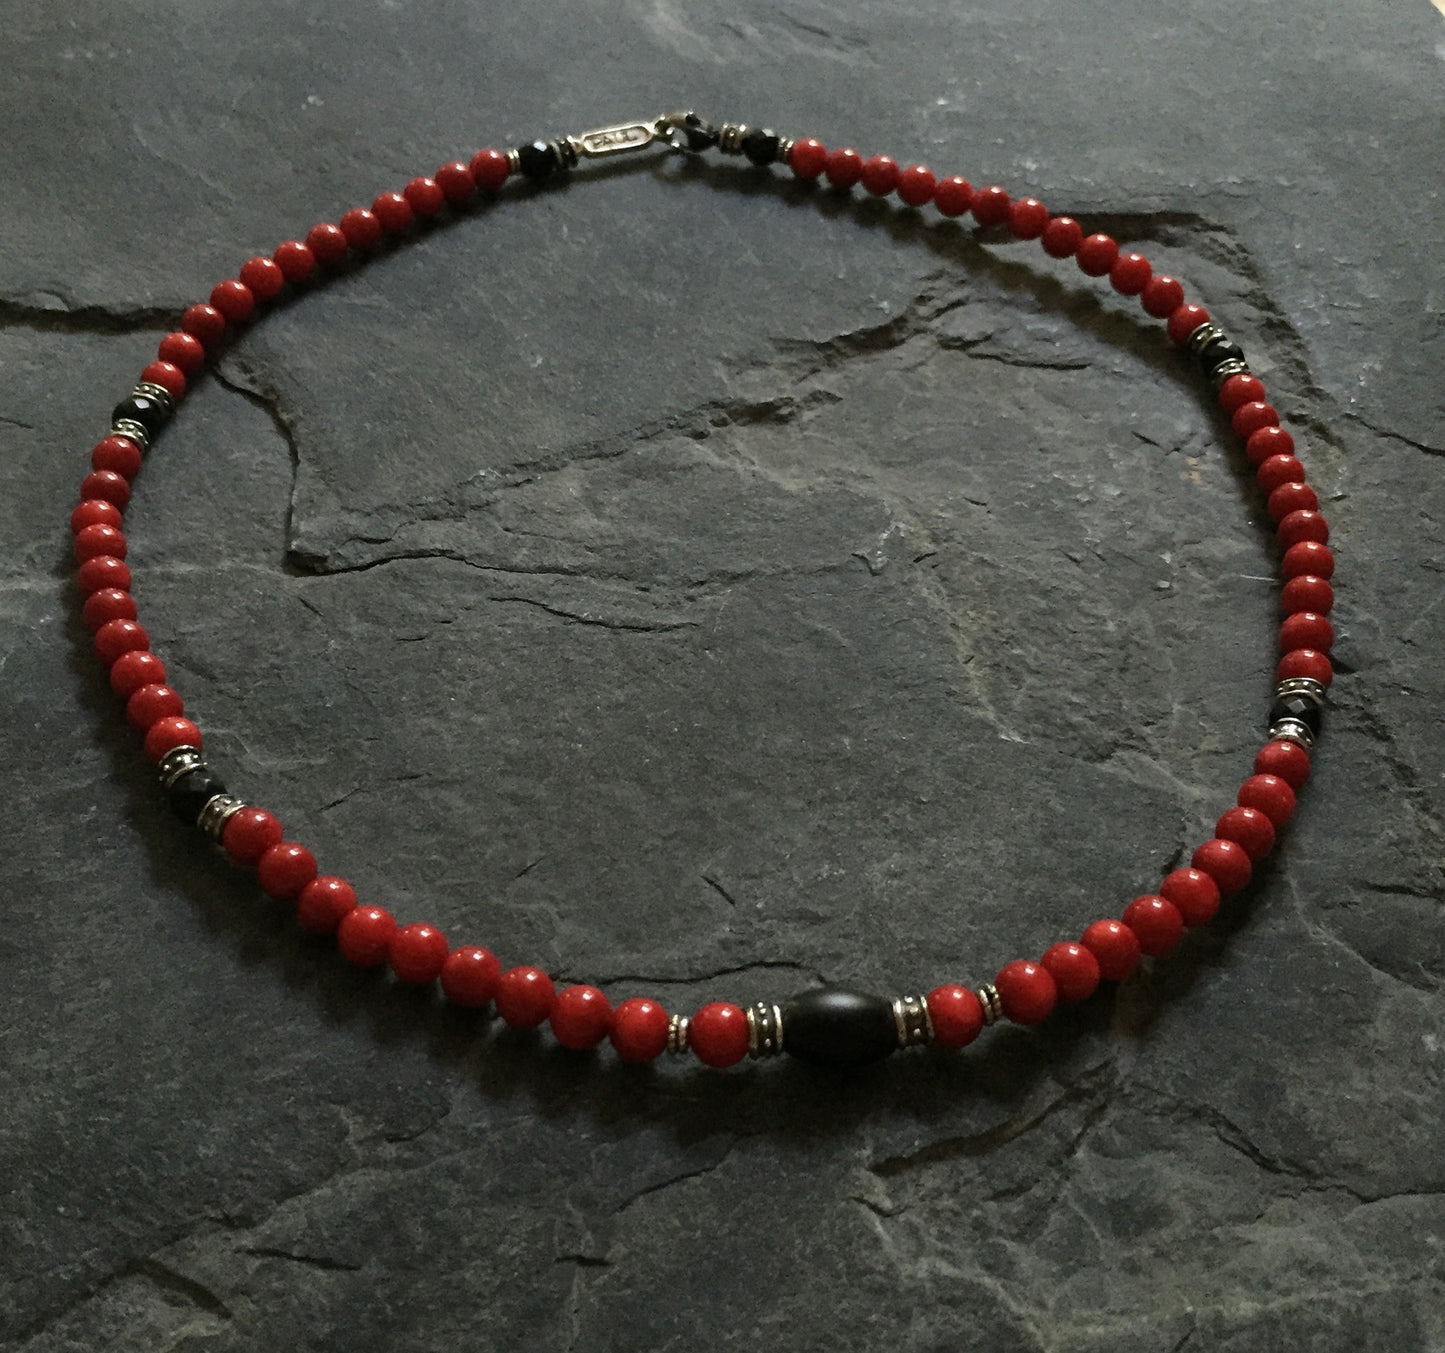 Necklace - Red Coral & Onyx With Silver Roundels by Roman Paul